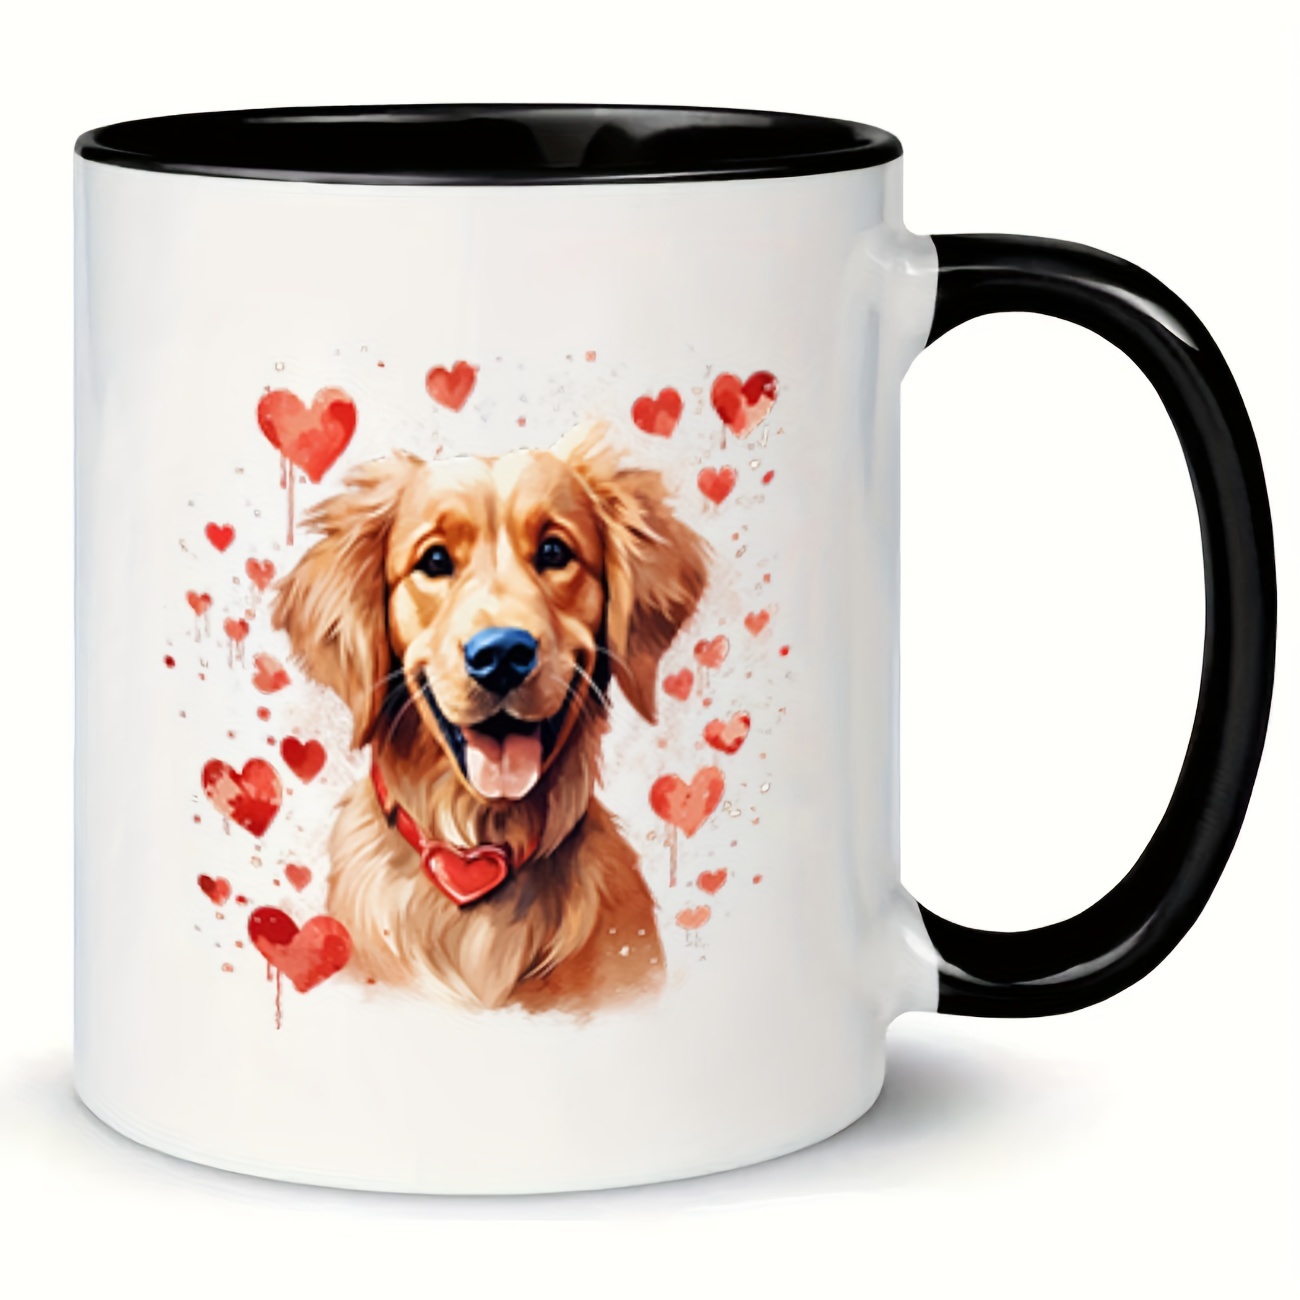 

1pc Ceramic Coffee Cup For Cafe - Golden Retriever 2 - 11oz/330ml Home Office Mug For Coffee Lovers, Gift For Friends, Sisters, Colleagues, Family, Coffee Drinker, Owner, Ceramic Cup, Holiday Gift